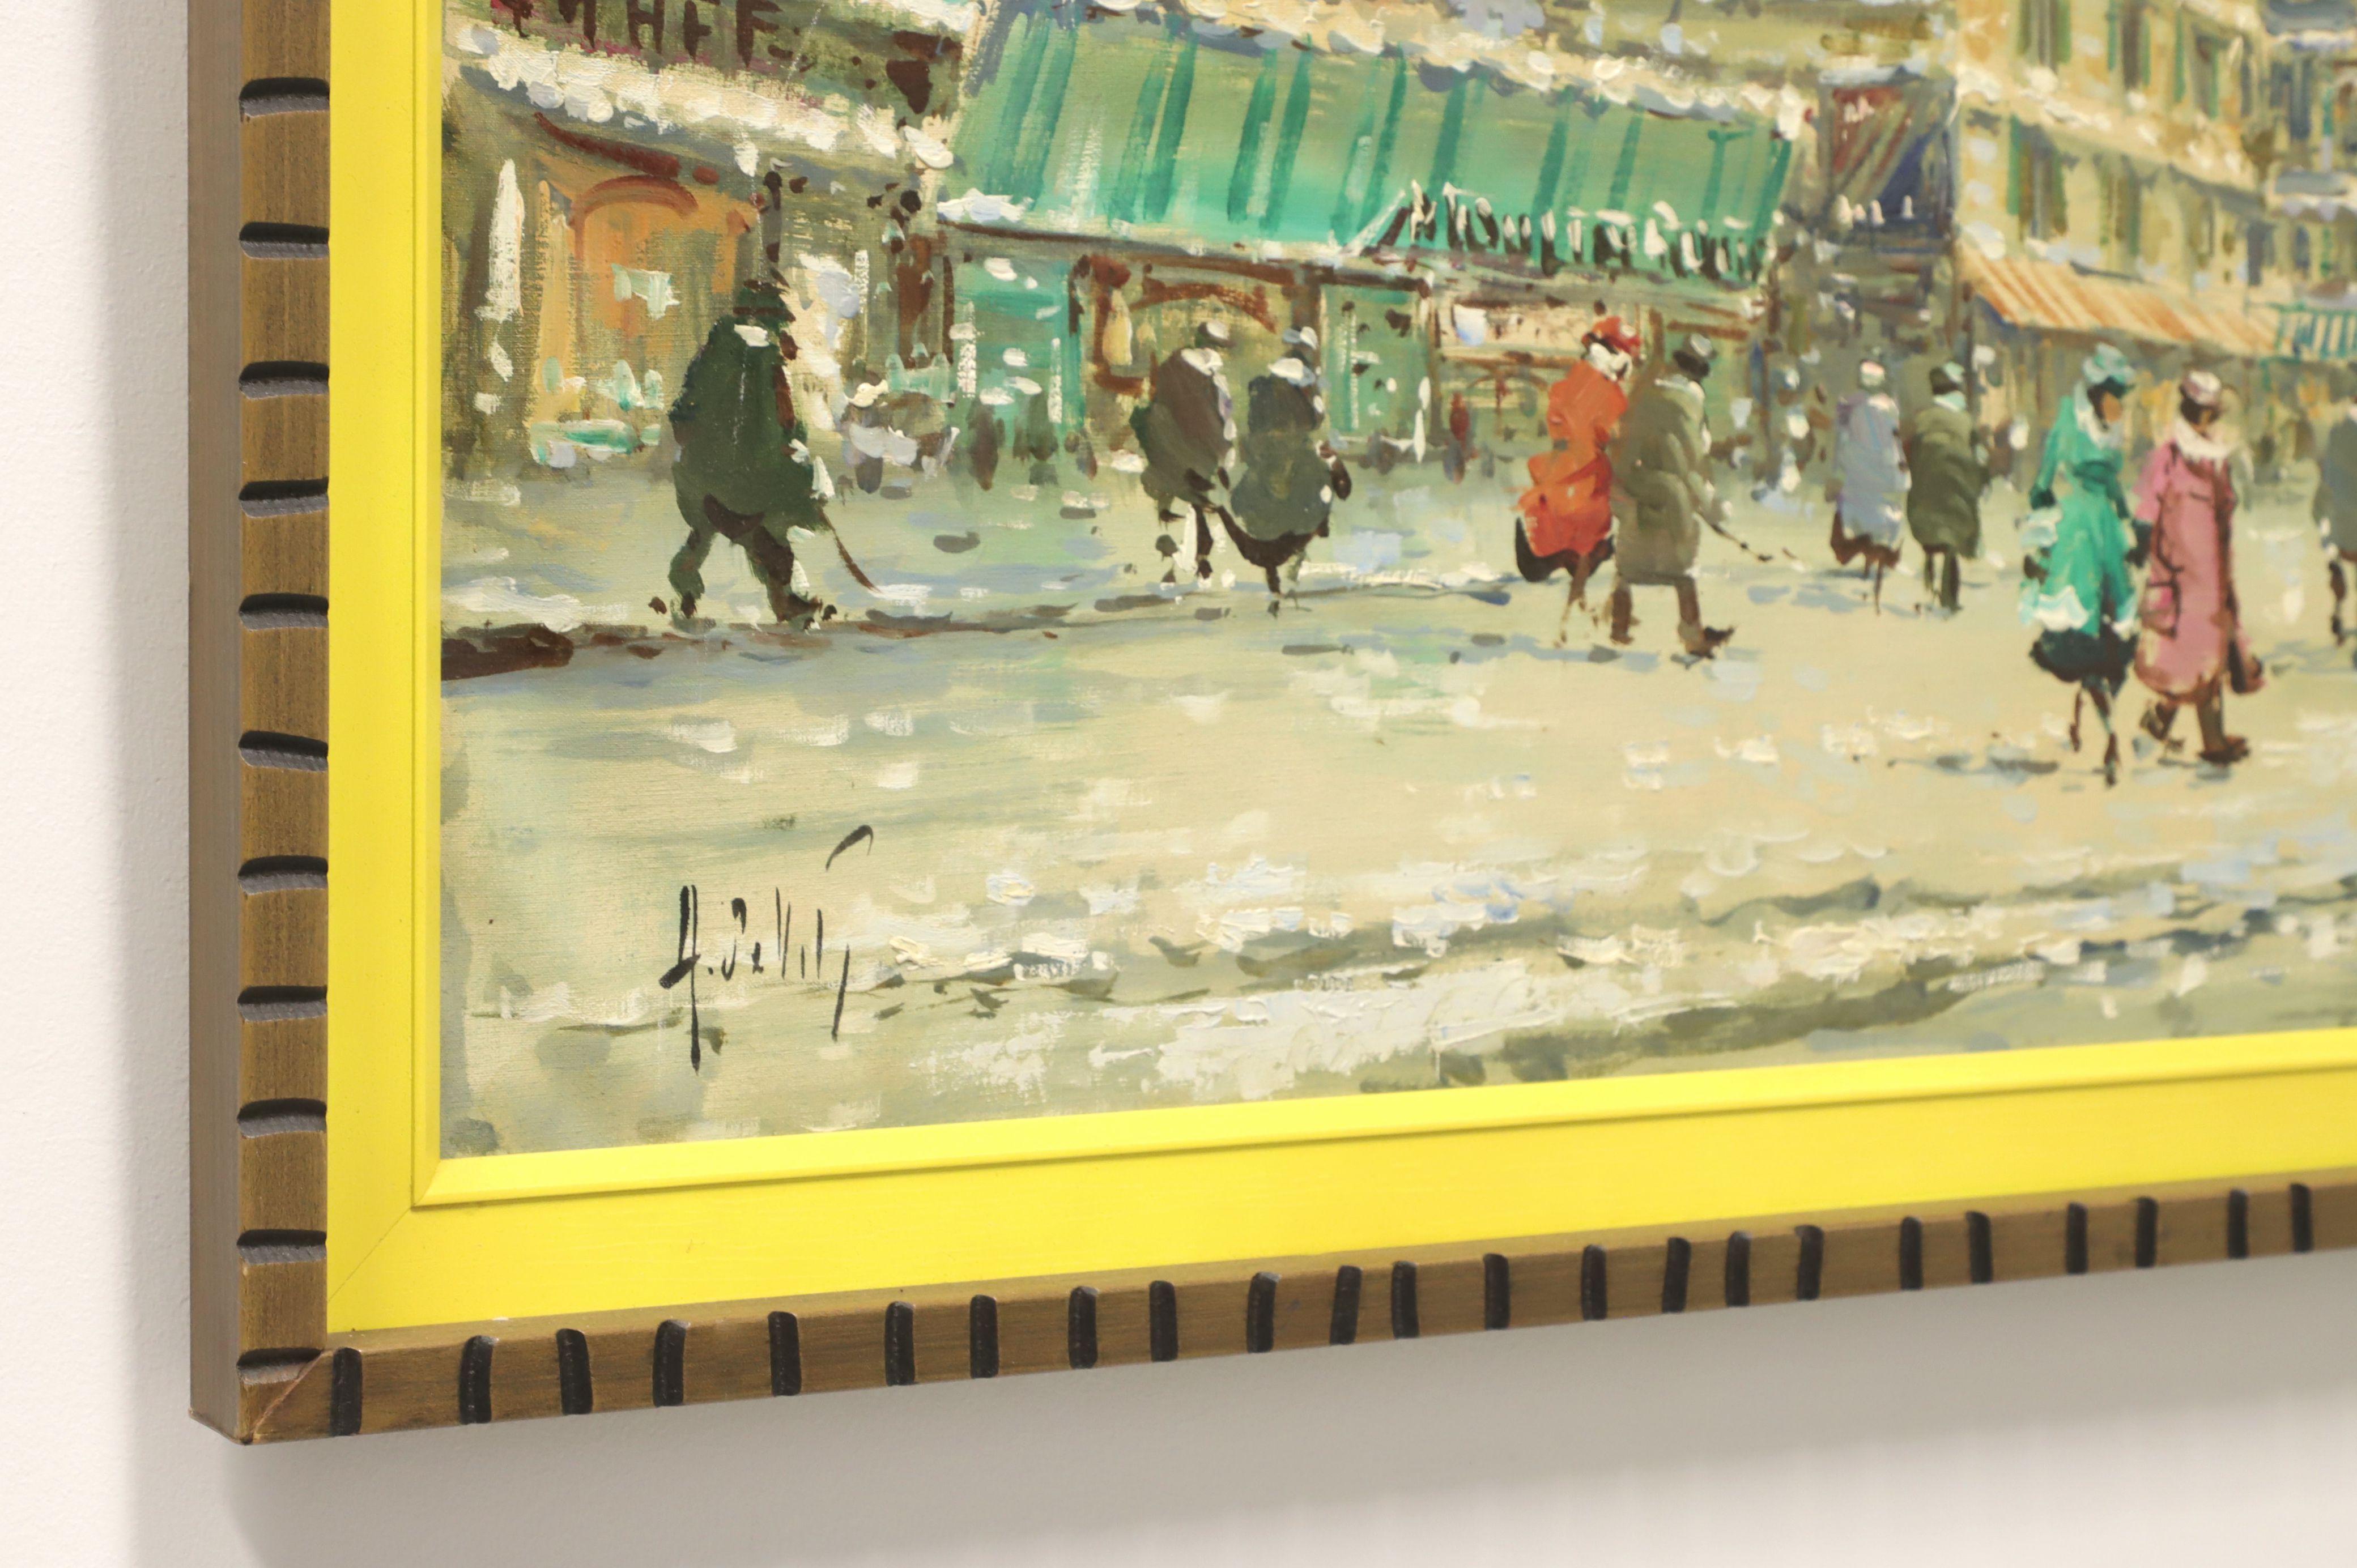 Other 1960's Original Oil on Canvas Painting - European Snowy Street Scene - Signed For Sale